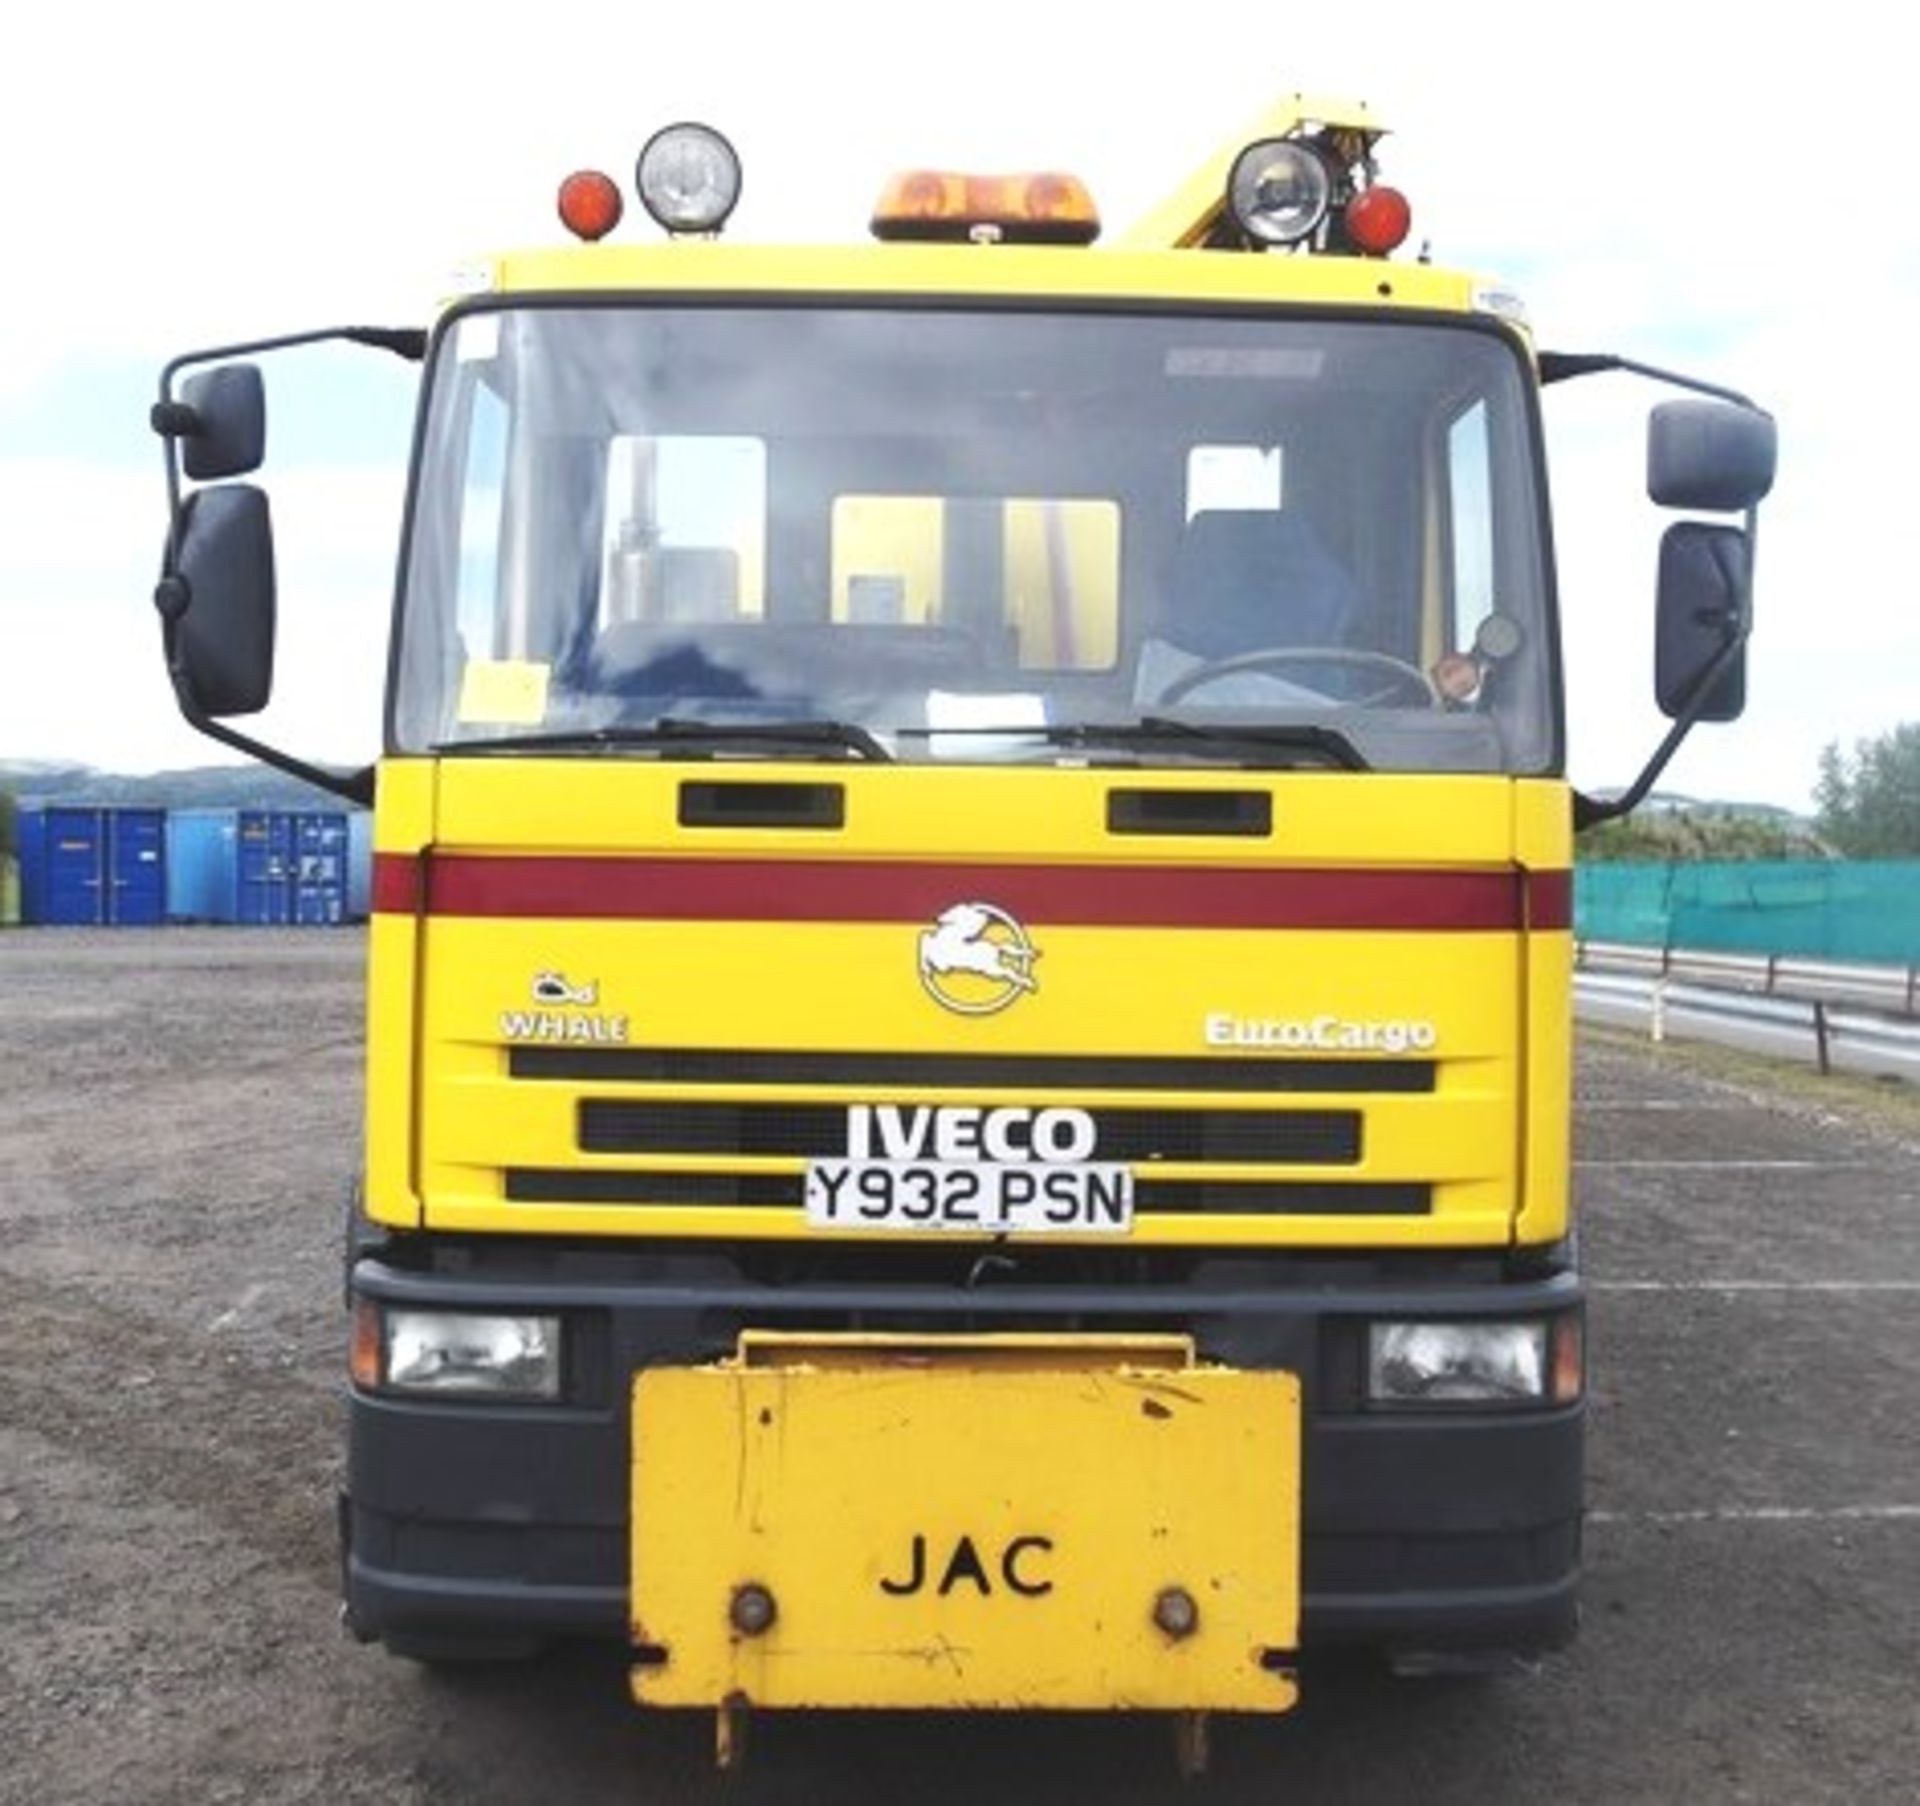 IVECO-FORD SUPERCARGO - 5861cc
Body: 2 Dr Truck
Color: Yellow
First Reg: 24/05/2001
Doors: 2
MOT: - Image 6 of 13